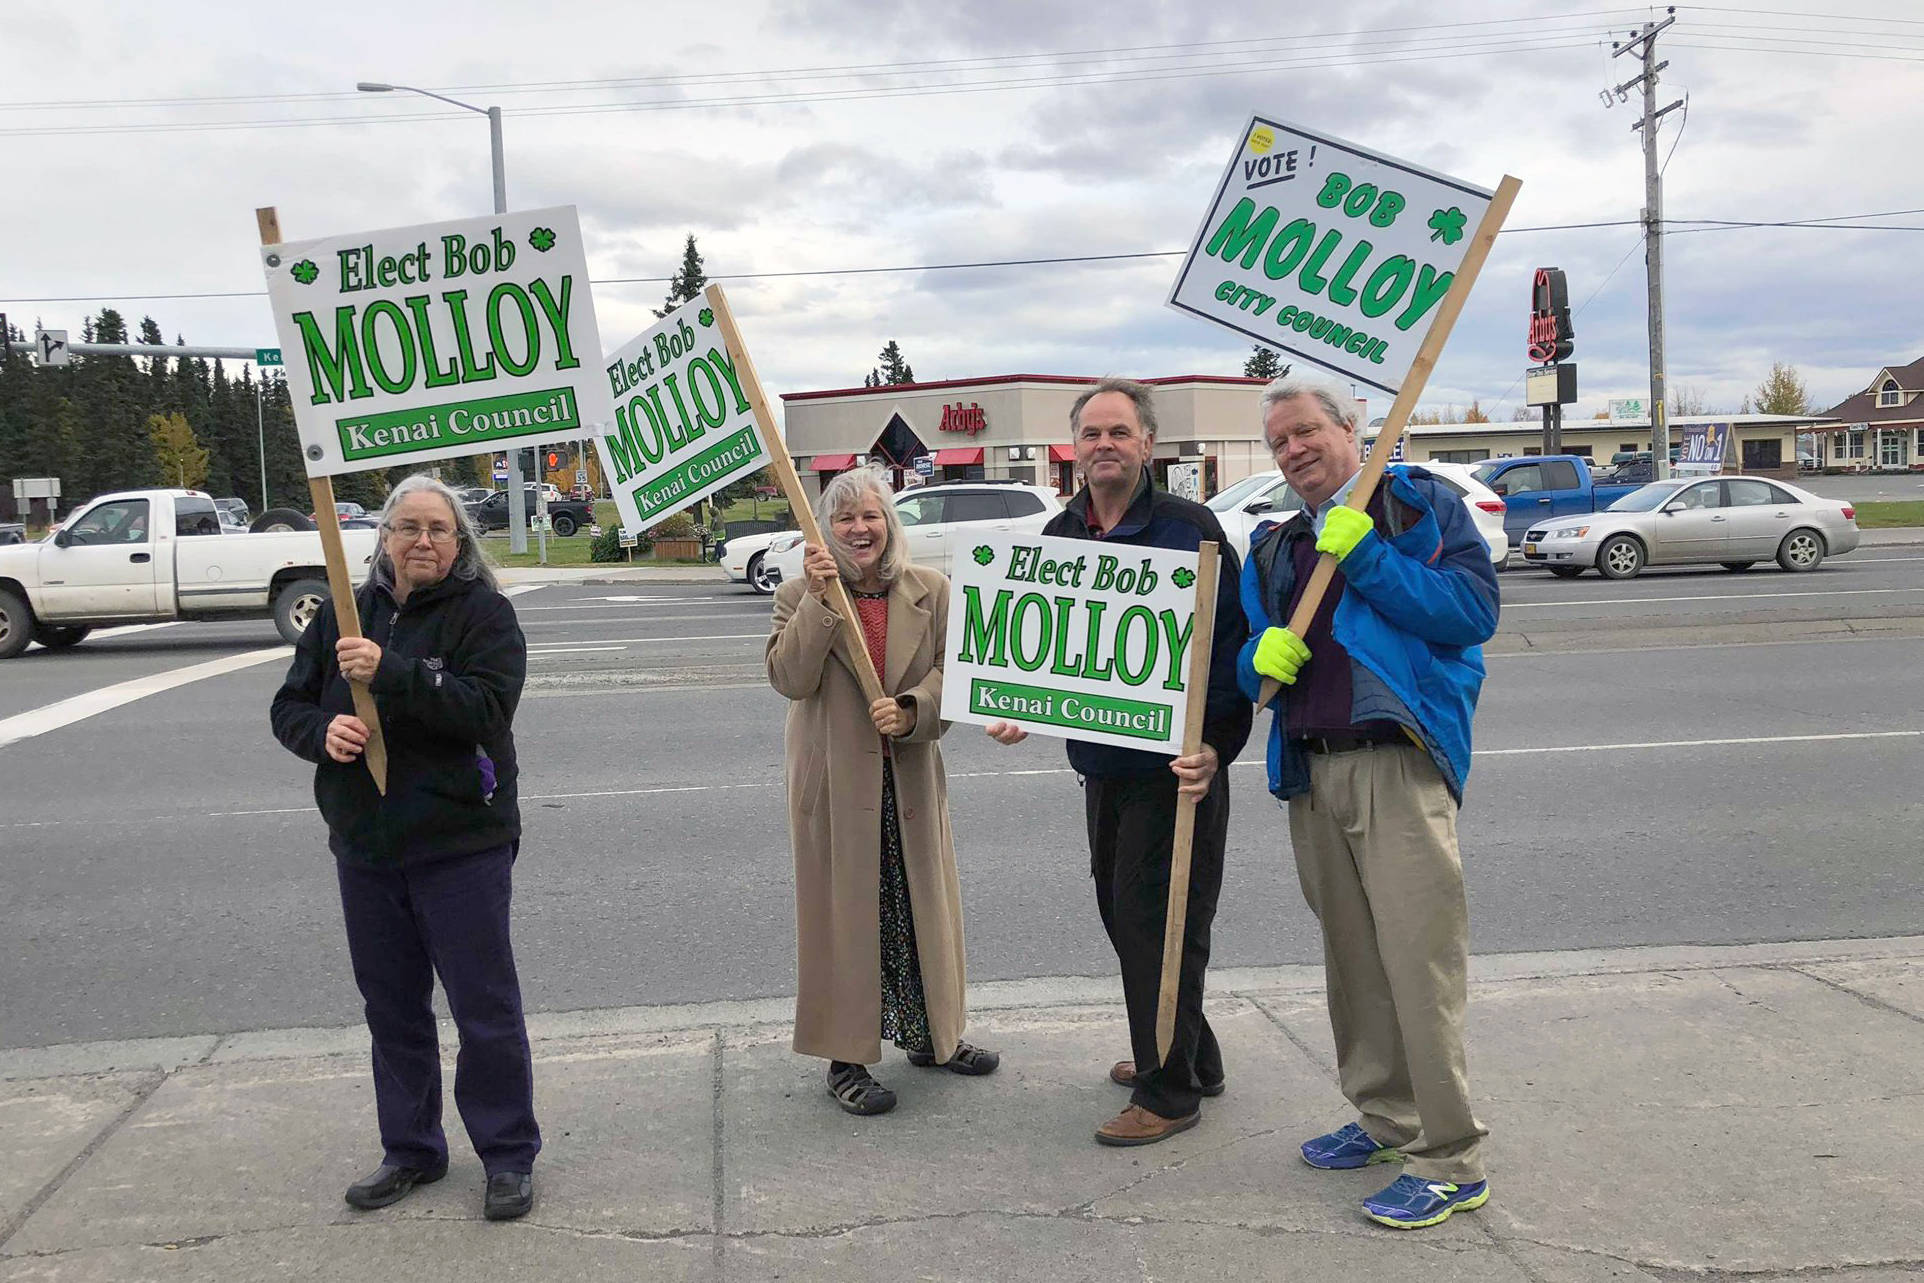 Supporters campaign for Kenai City Council member Bob Molloy on the corner of Main Street Loop and Kenai Spur Highway on Tuesday, Oct. 2, 2018 in Kenai, Alaska. (Photo by Victoria Petersen/Peninsula Clarion)